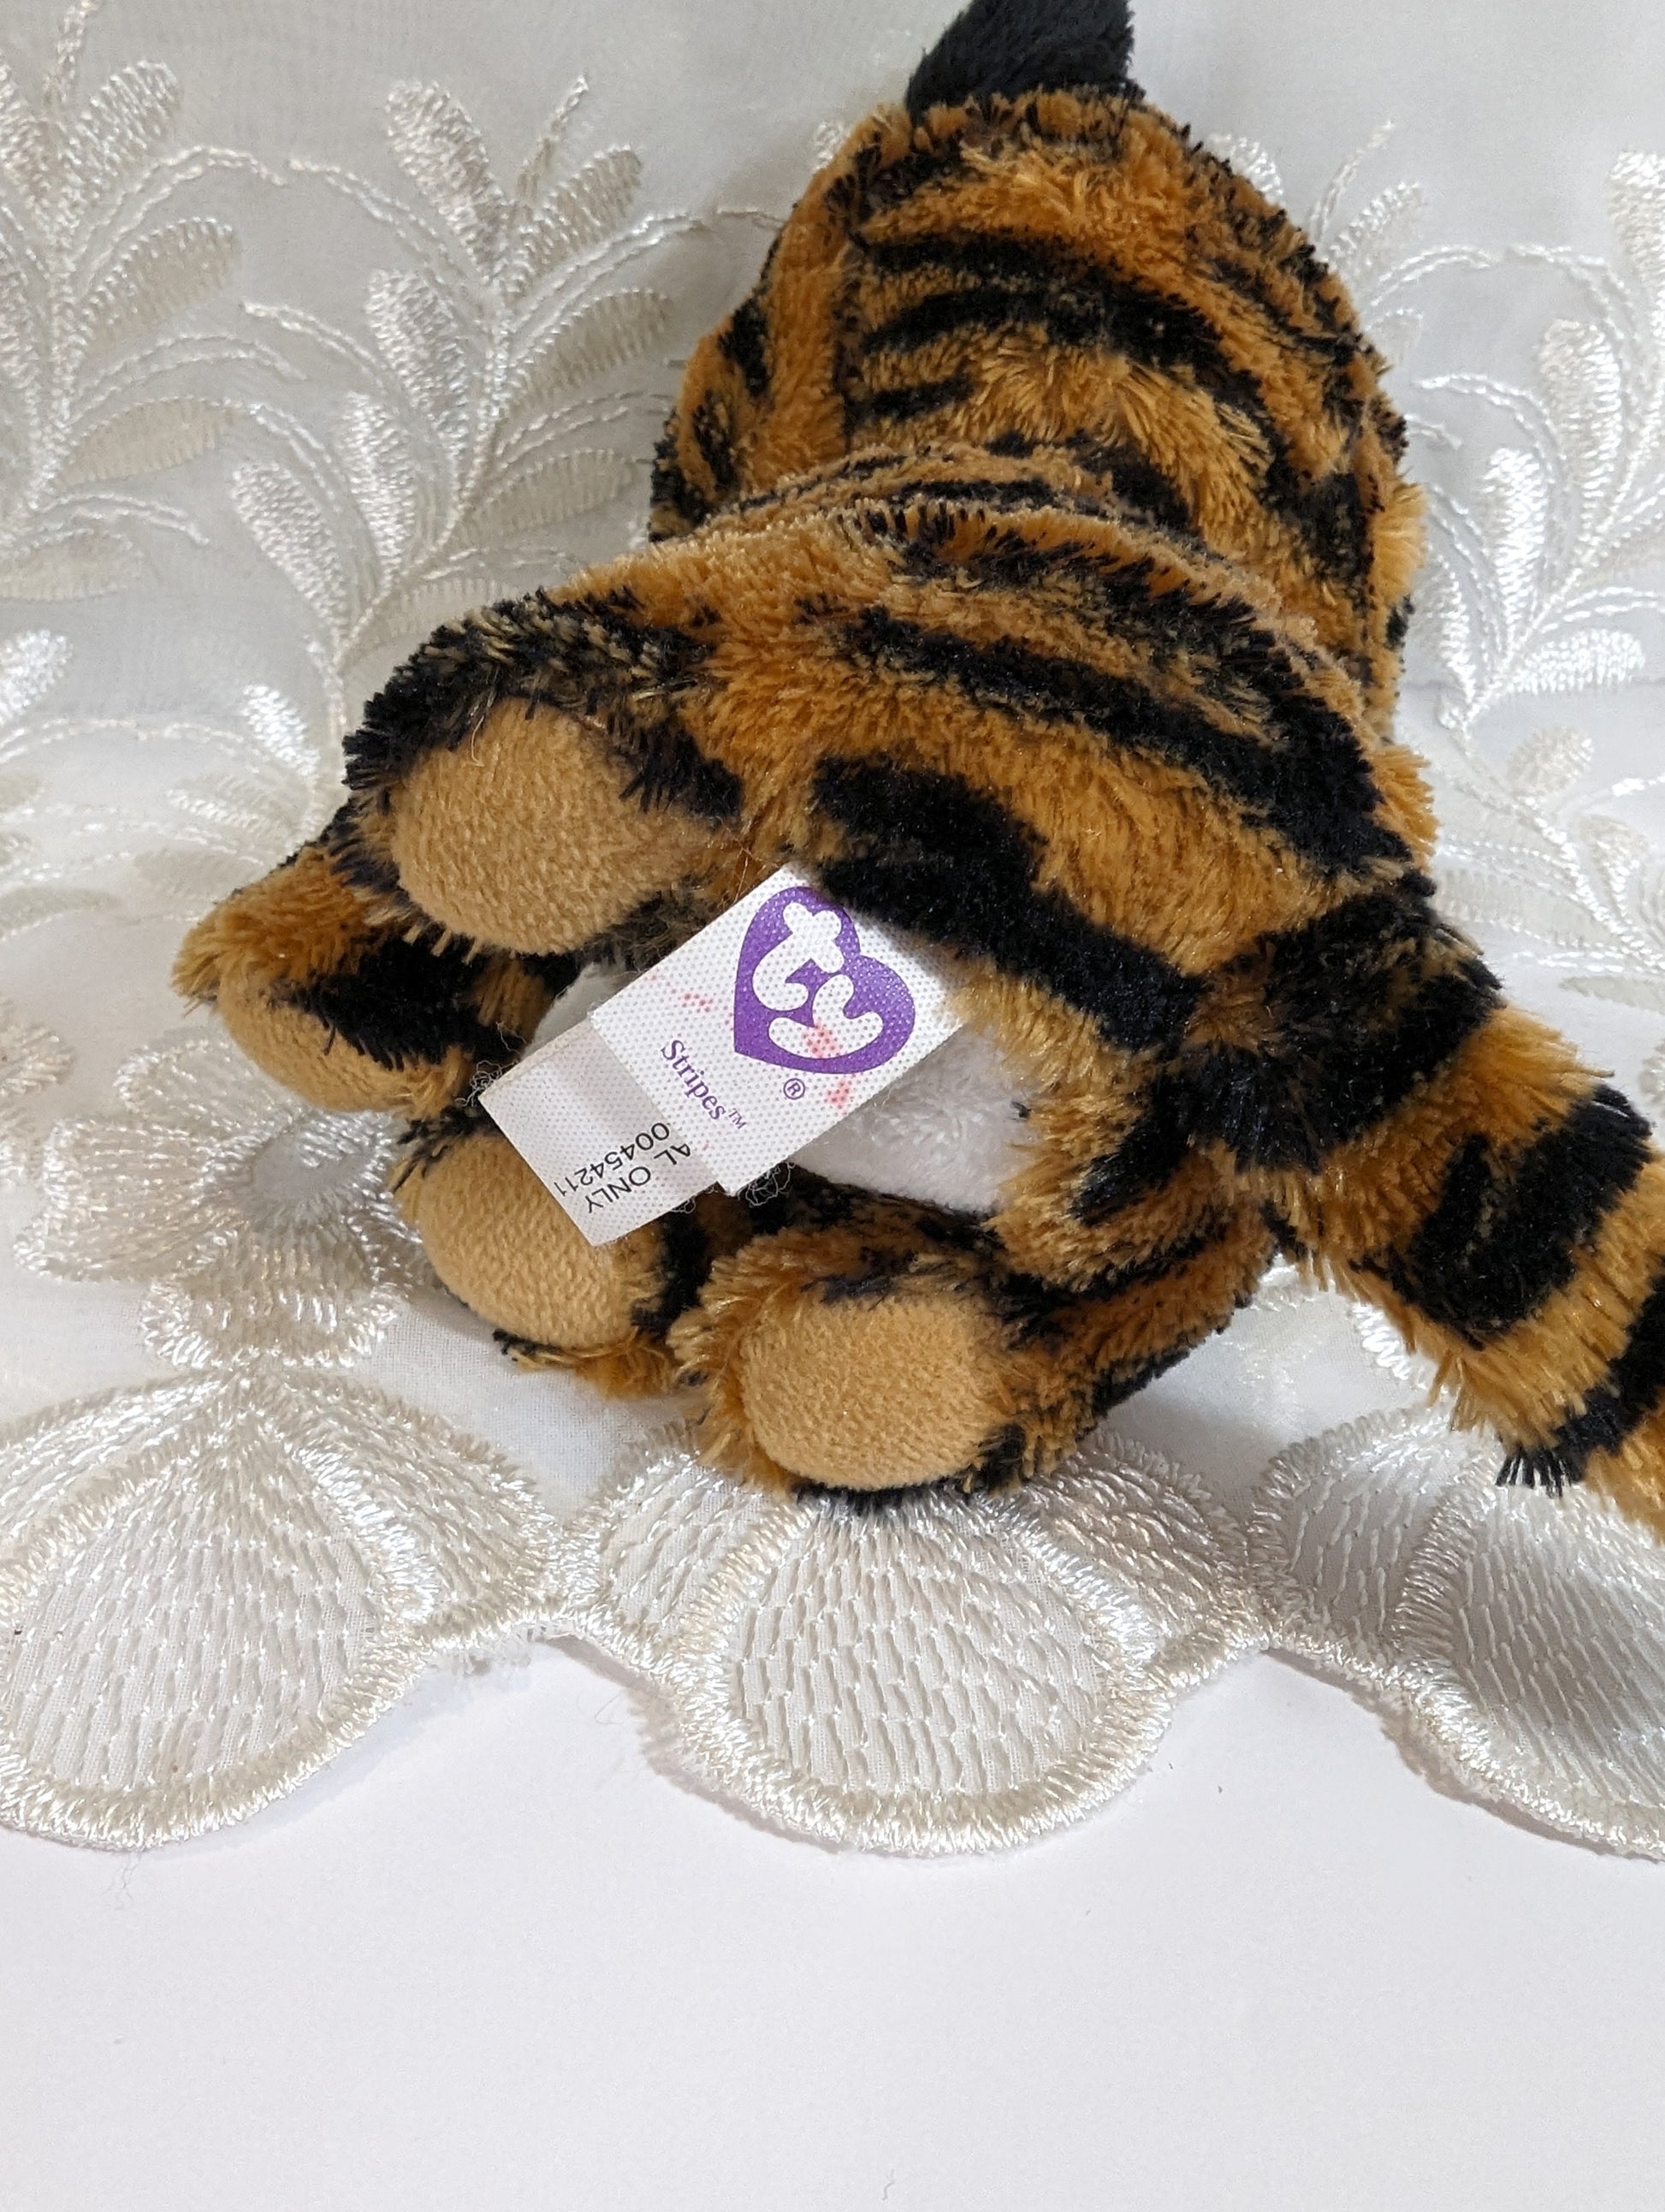 Ty Beanie Boo - Stripes The Tiger (6in) Solid Eyes, First Gen, *pre-owned condition* - Vintage Beanies Canada